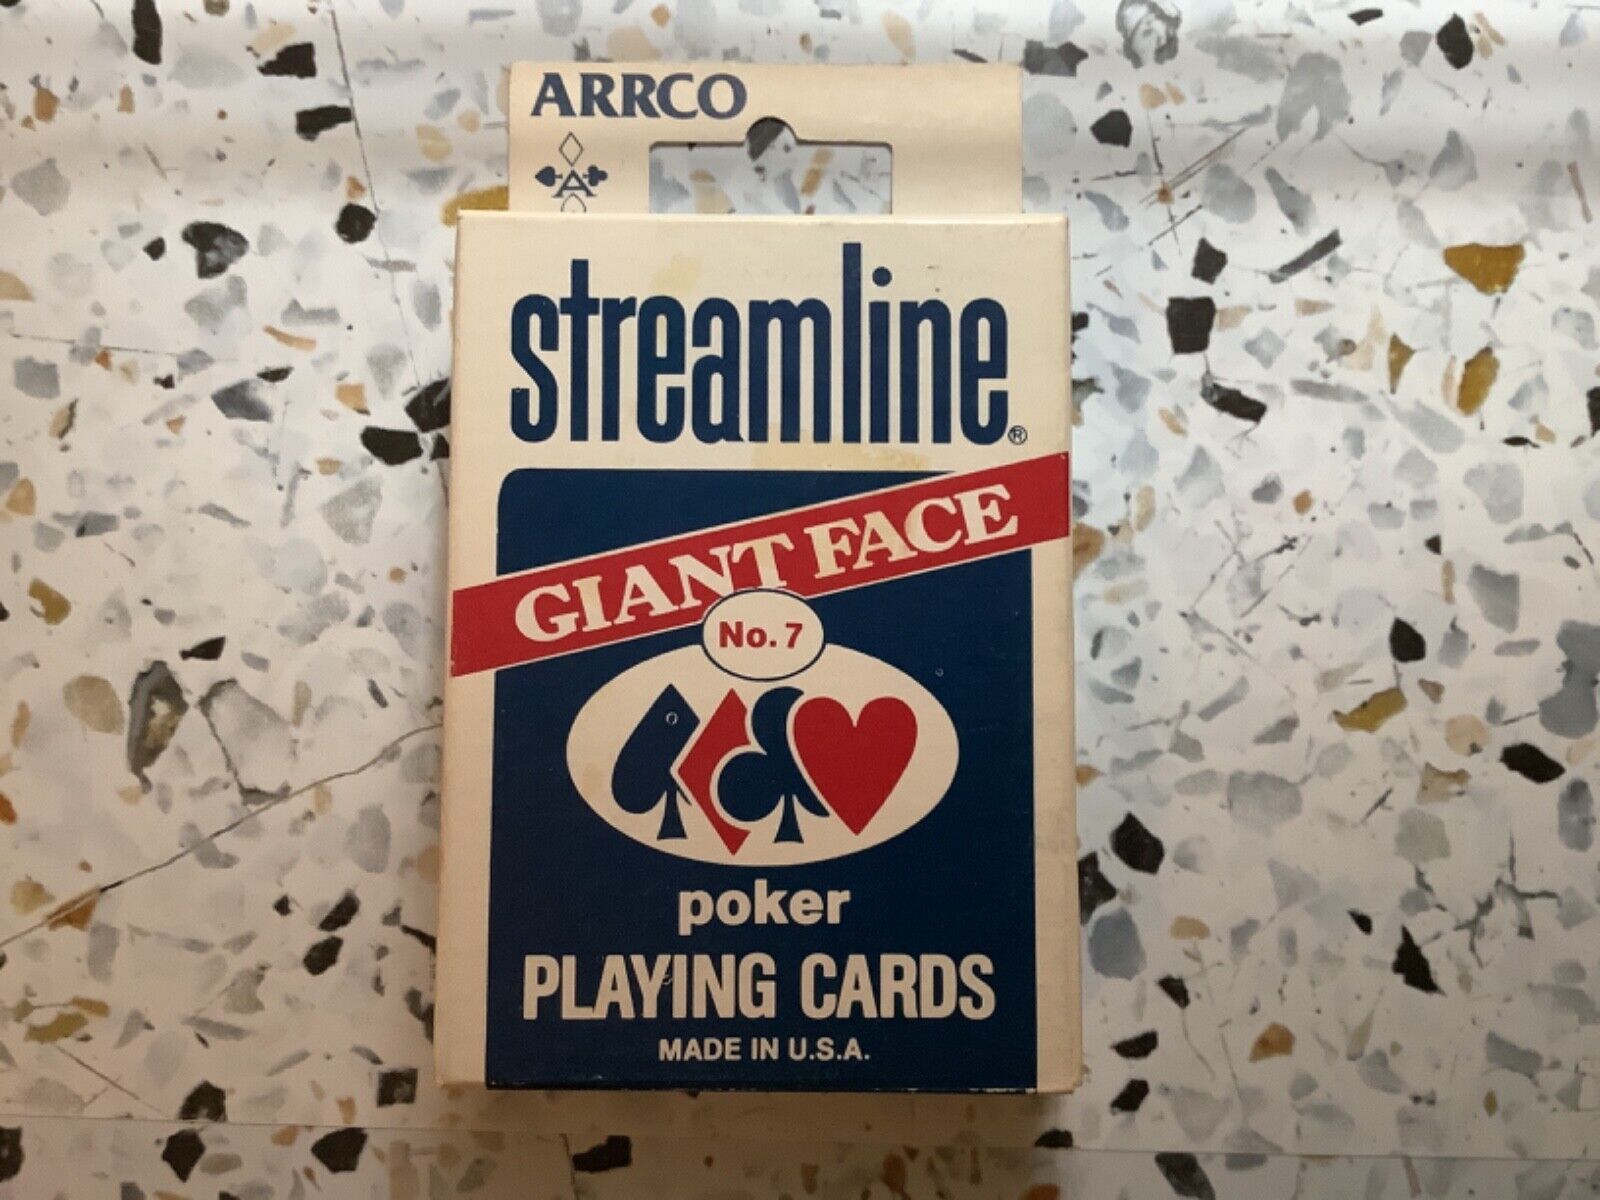 Streamline No7 giant face plastic playing cards, ARRCO